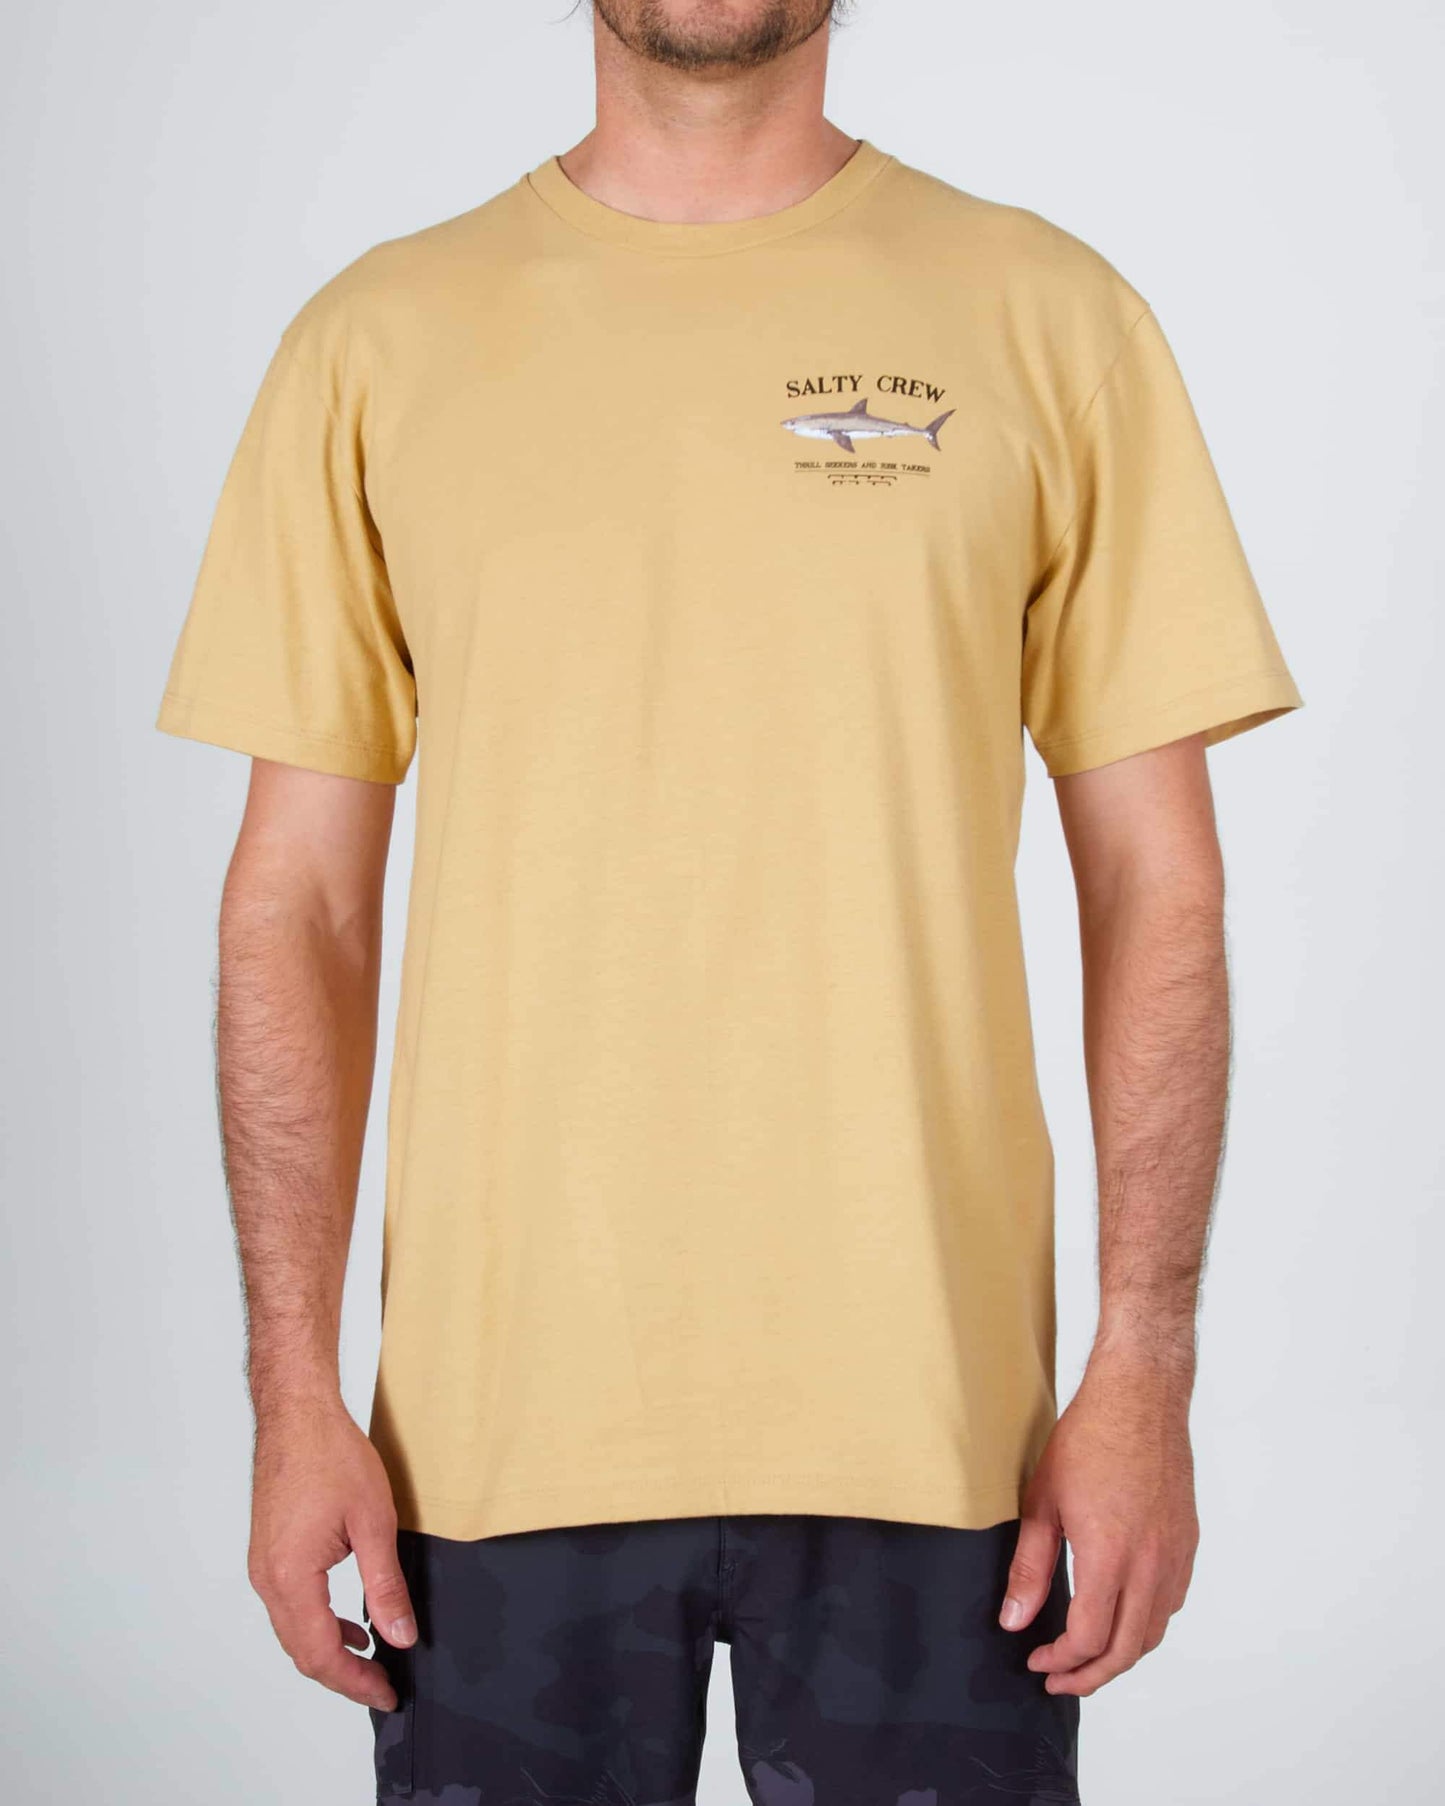 Salty crew T-SHIRTS S/S Bruce Premium S/S Tee - Camel in Camel